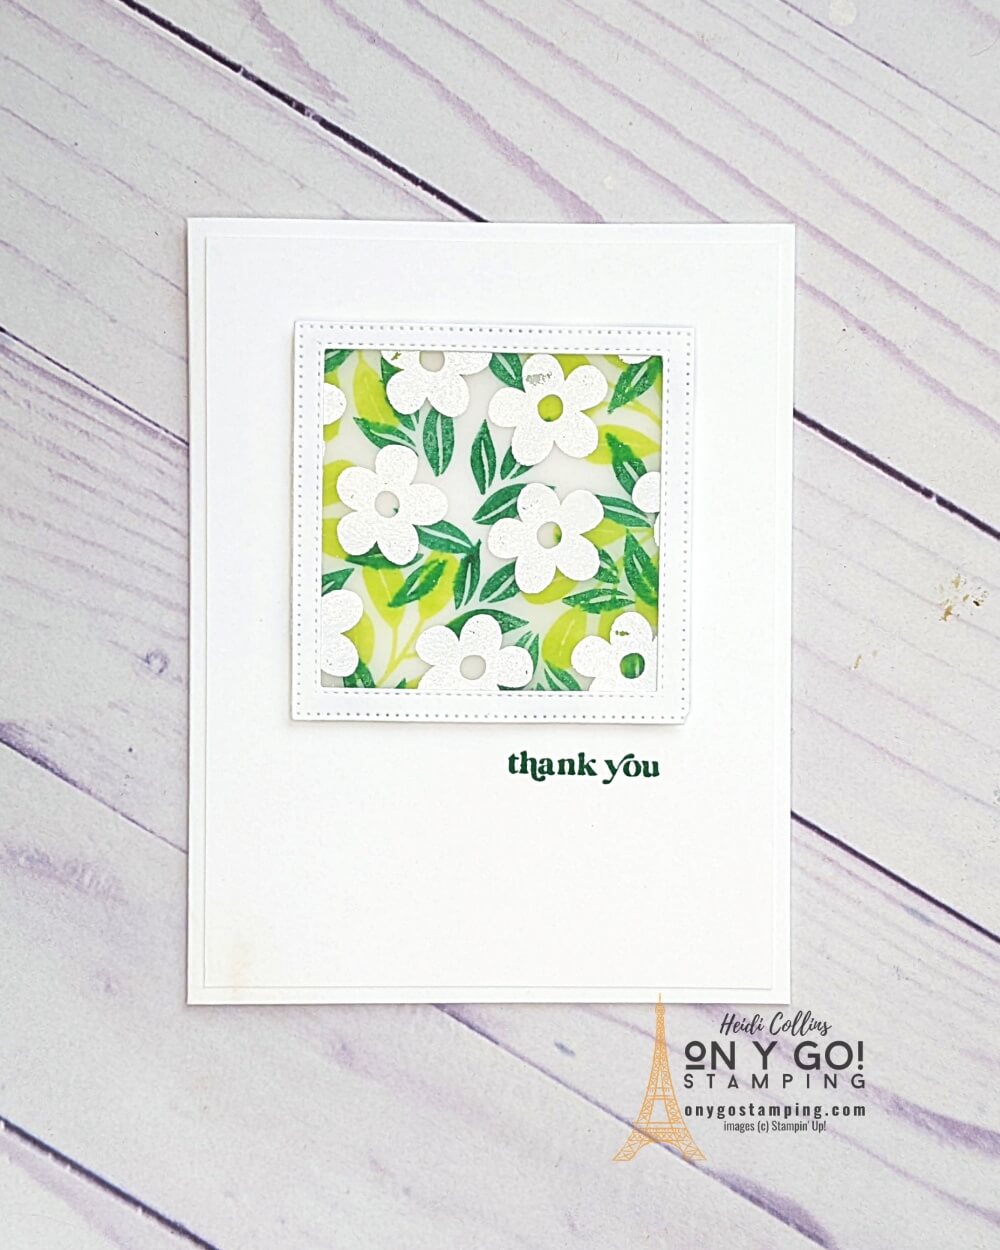 Clean and Simple card design using the Simply Fabulous stamp set from Stampin' Up!® and the double stamped vellum card making technique.